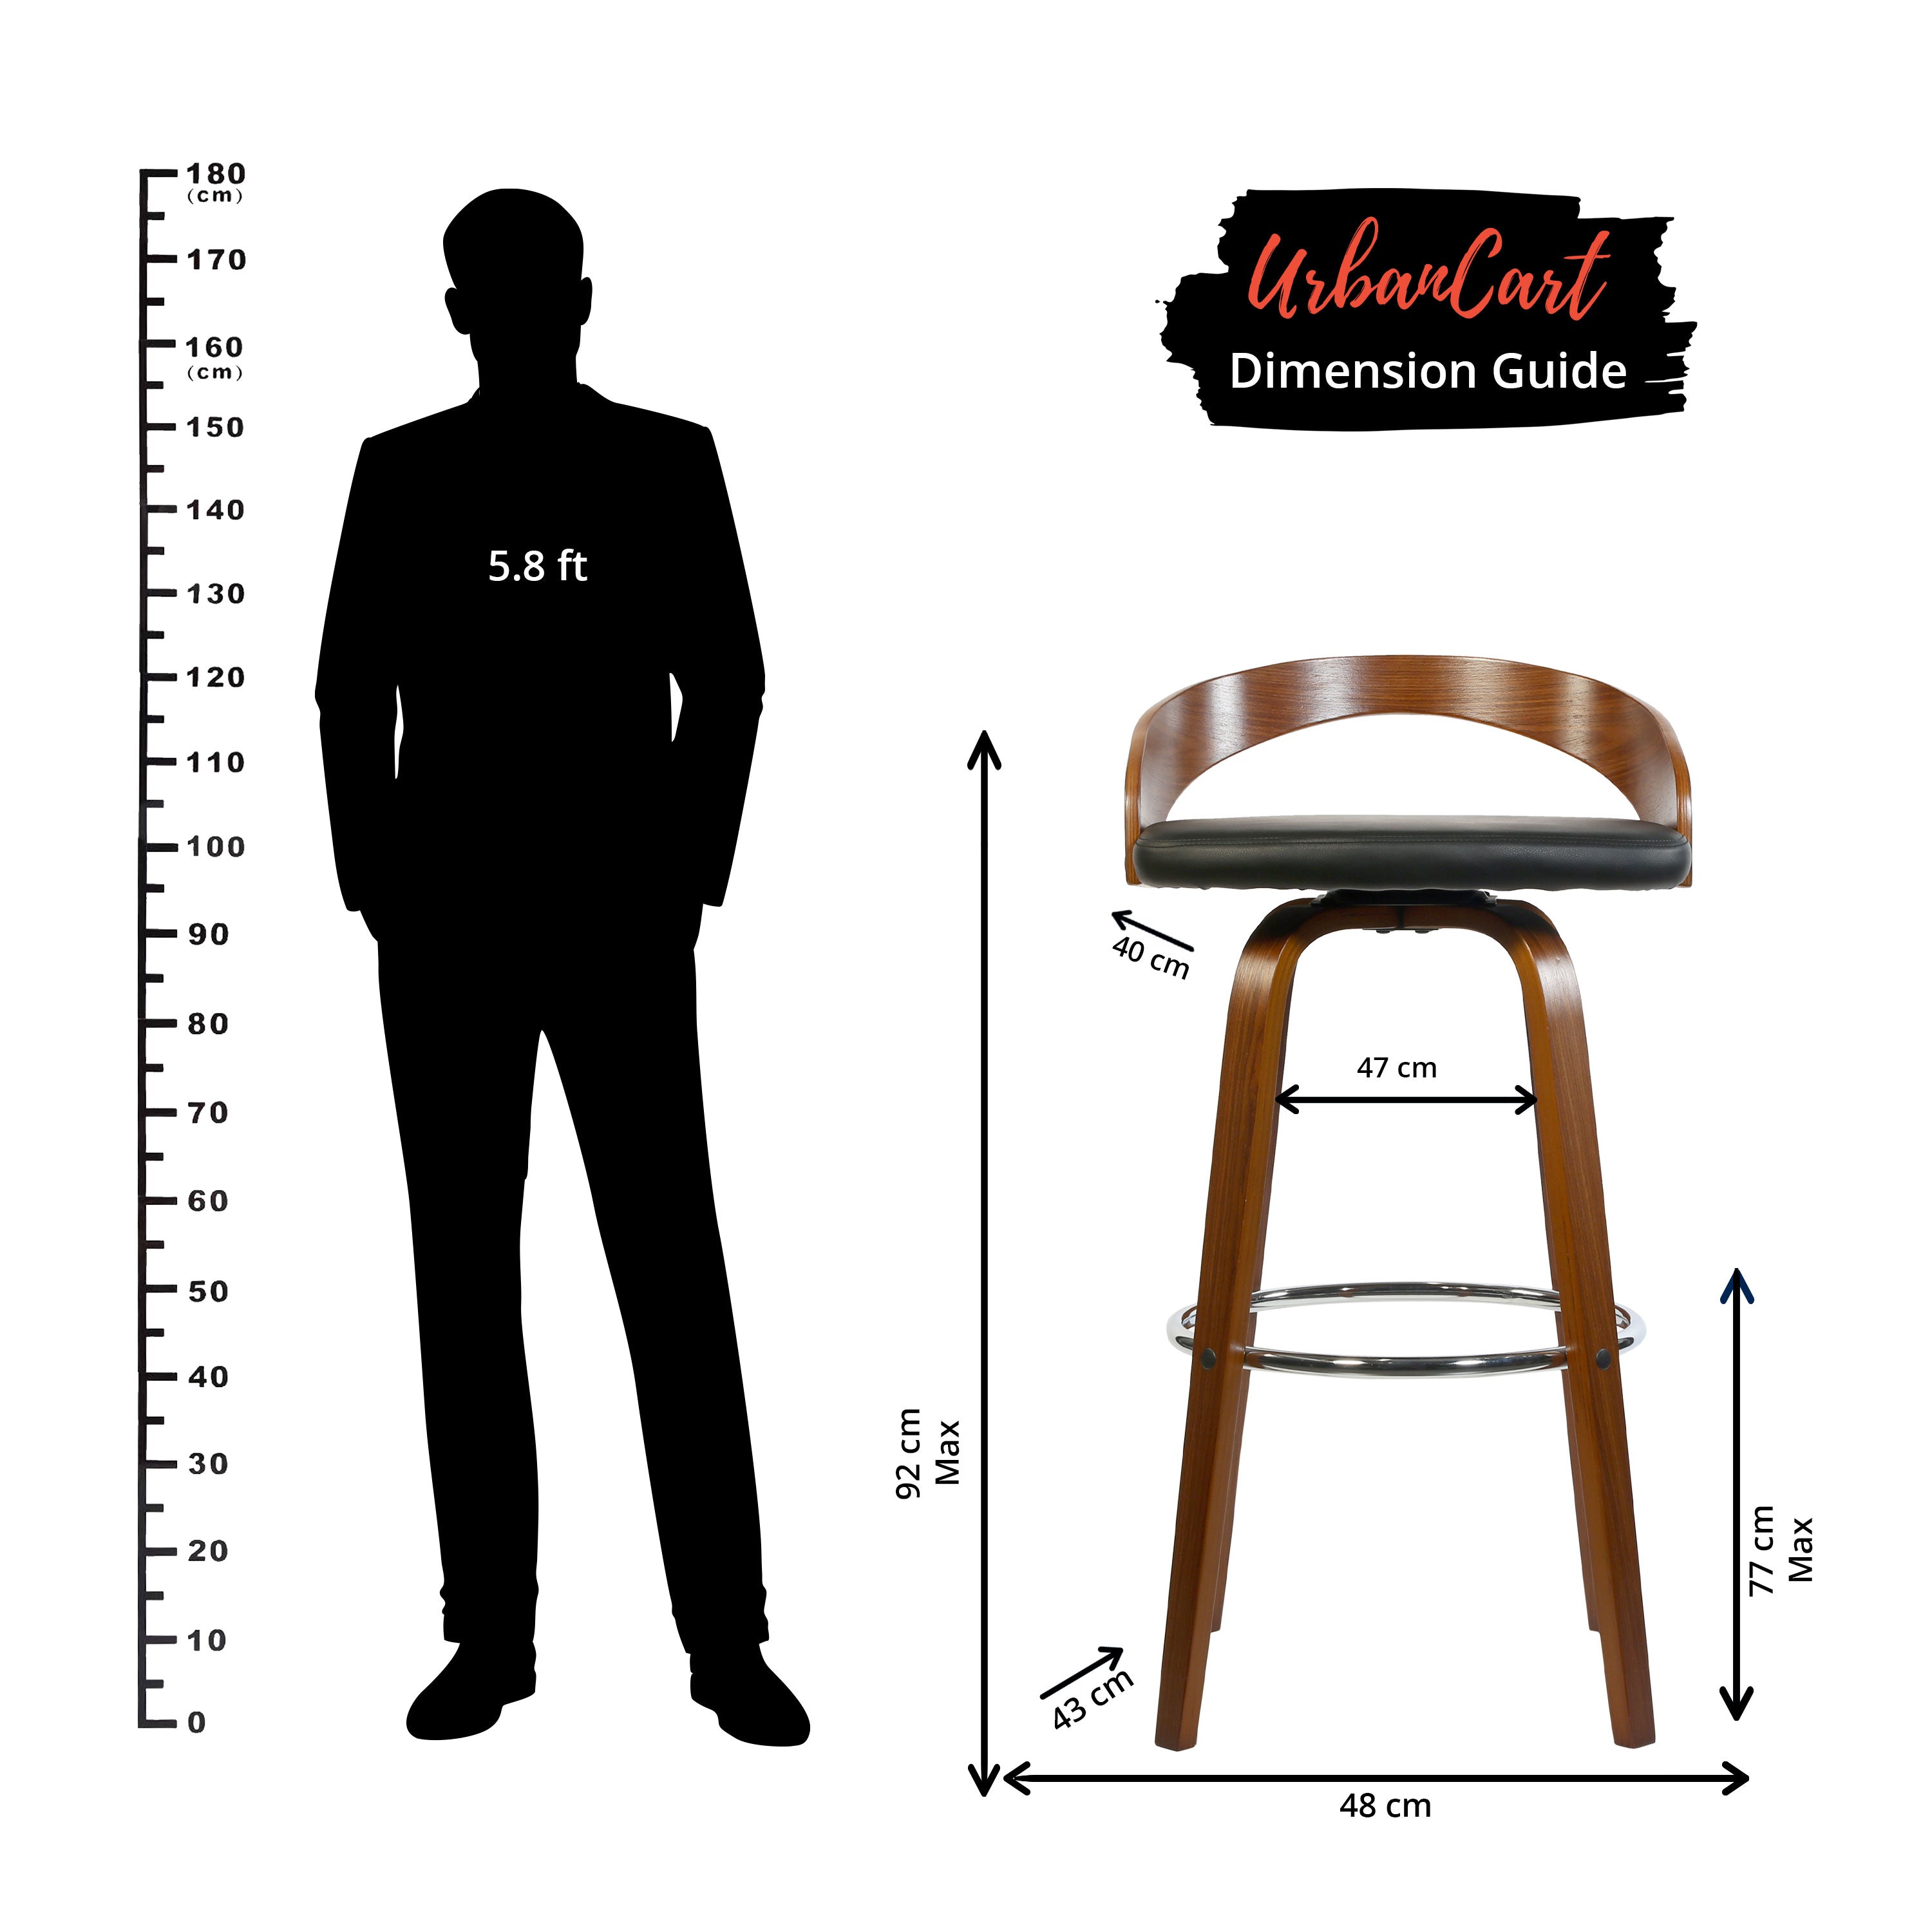 Teo Barstool With Unique Wooden Backrest, Leg And Leather Seat.